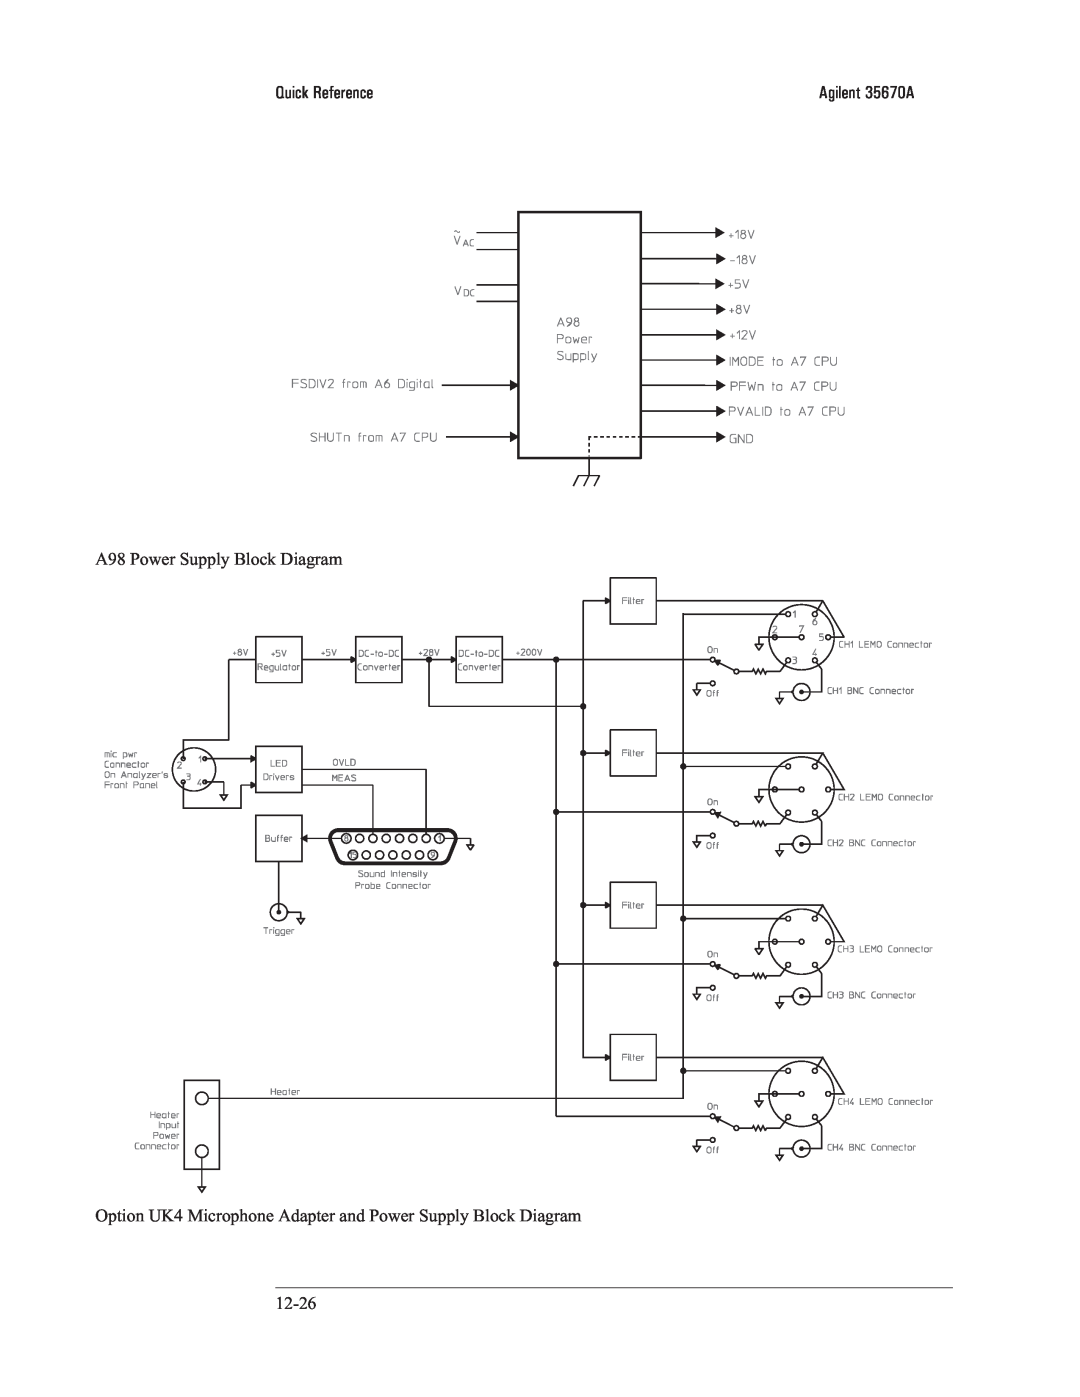 Agilent Technologies 35670-90066 manual Quick Reference, A98 Power Supply Block Diagram, Agilent 35670A 